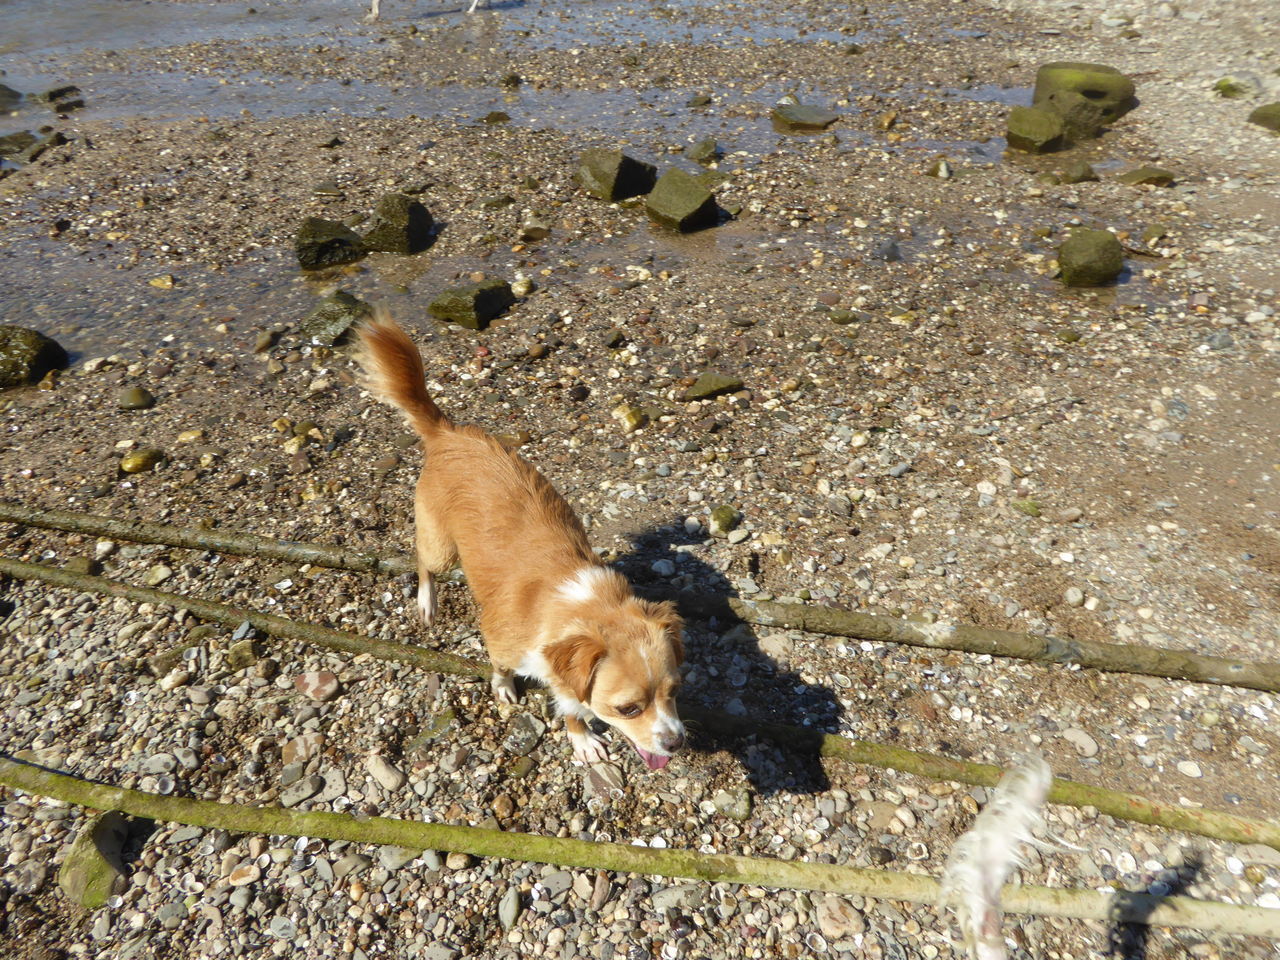 HIGH ANGLE VIEW OF A DOG ON SHORE